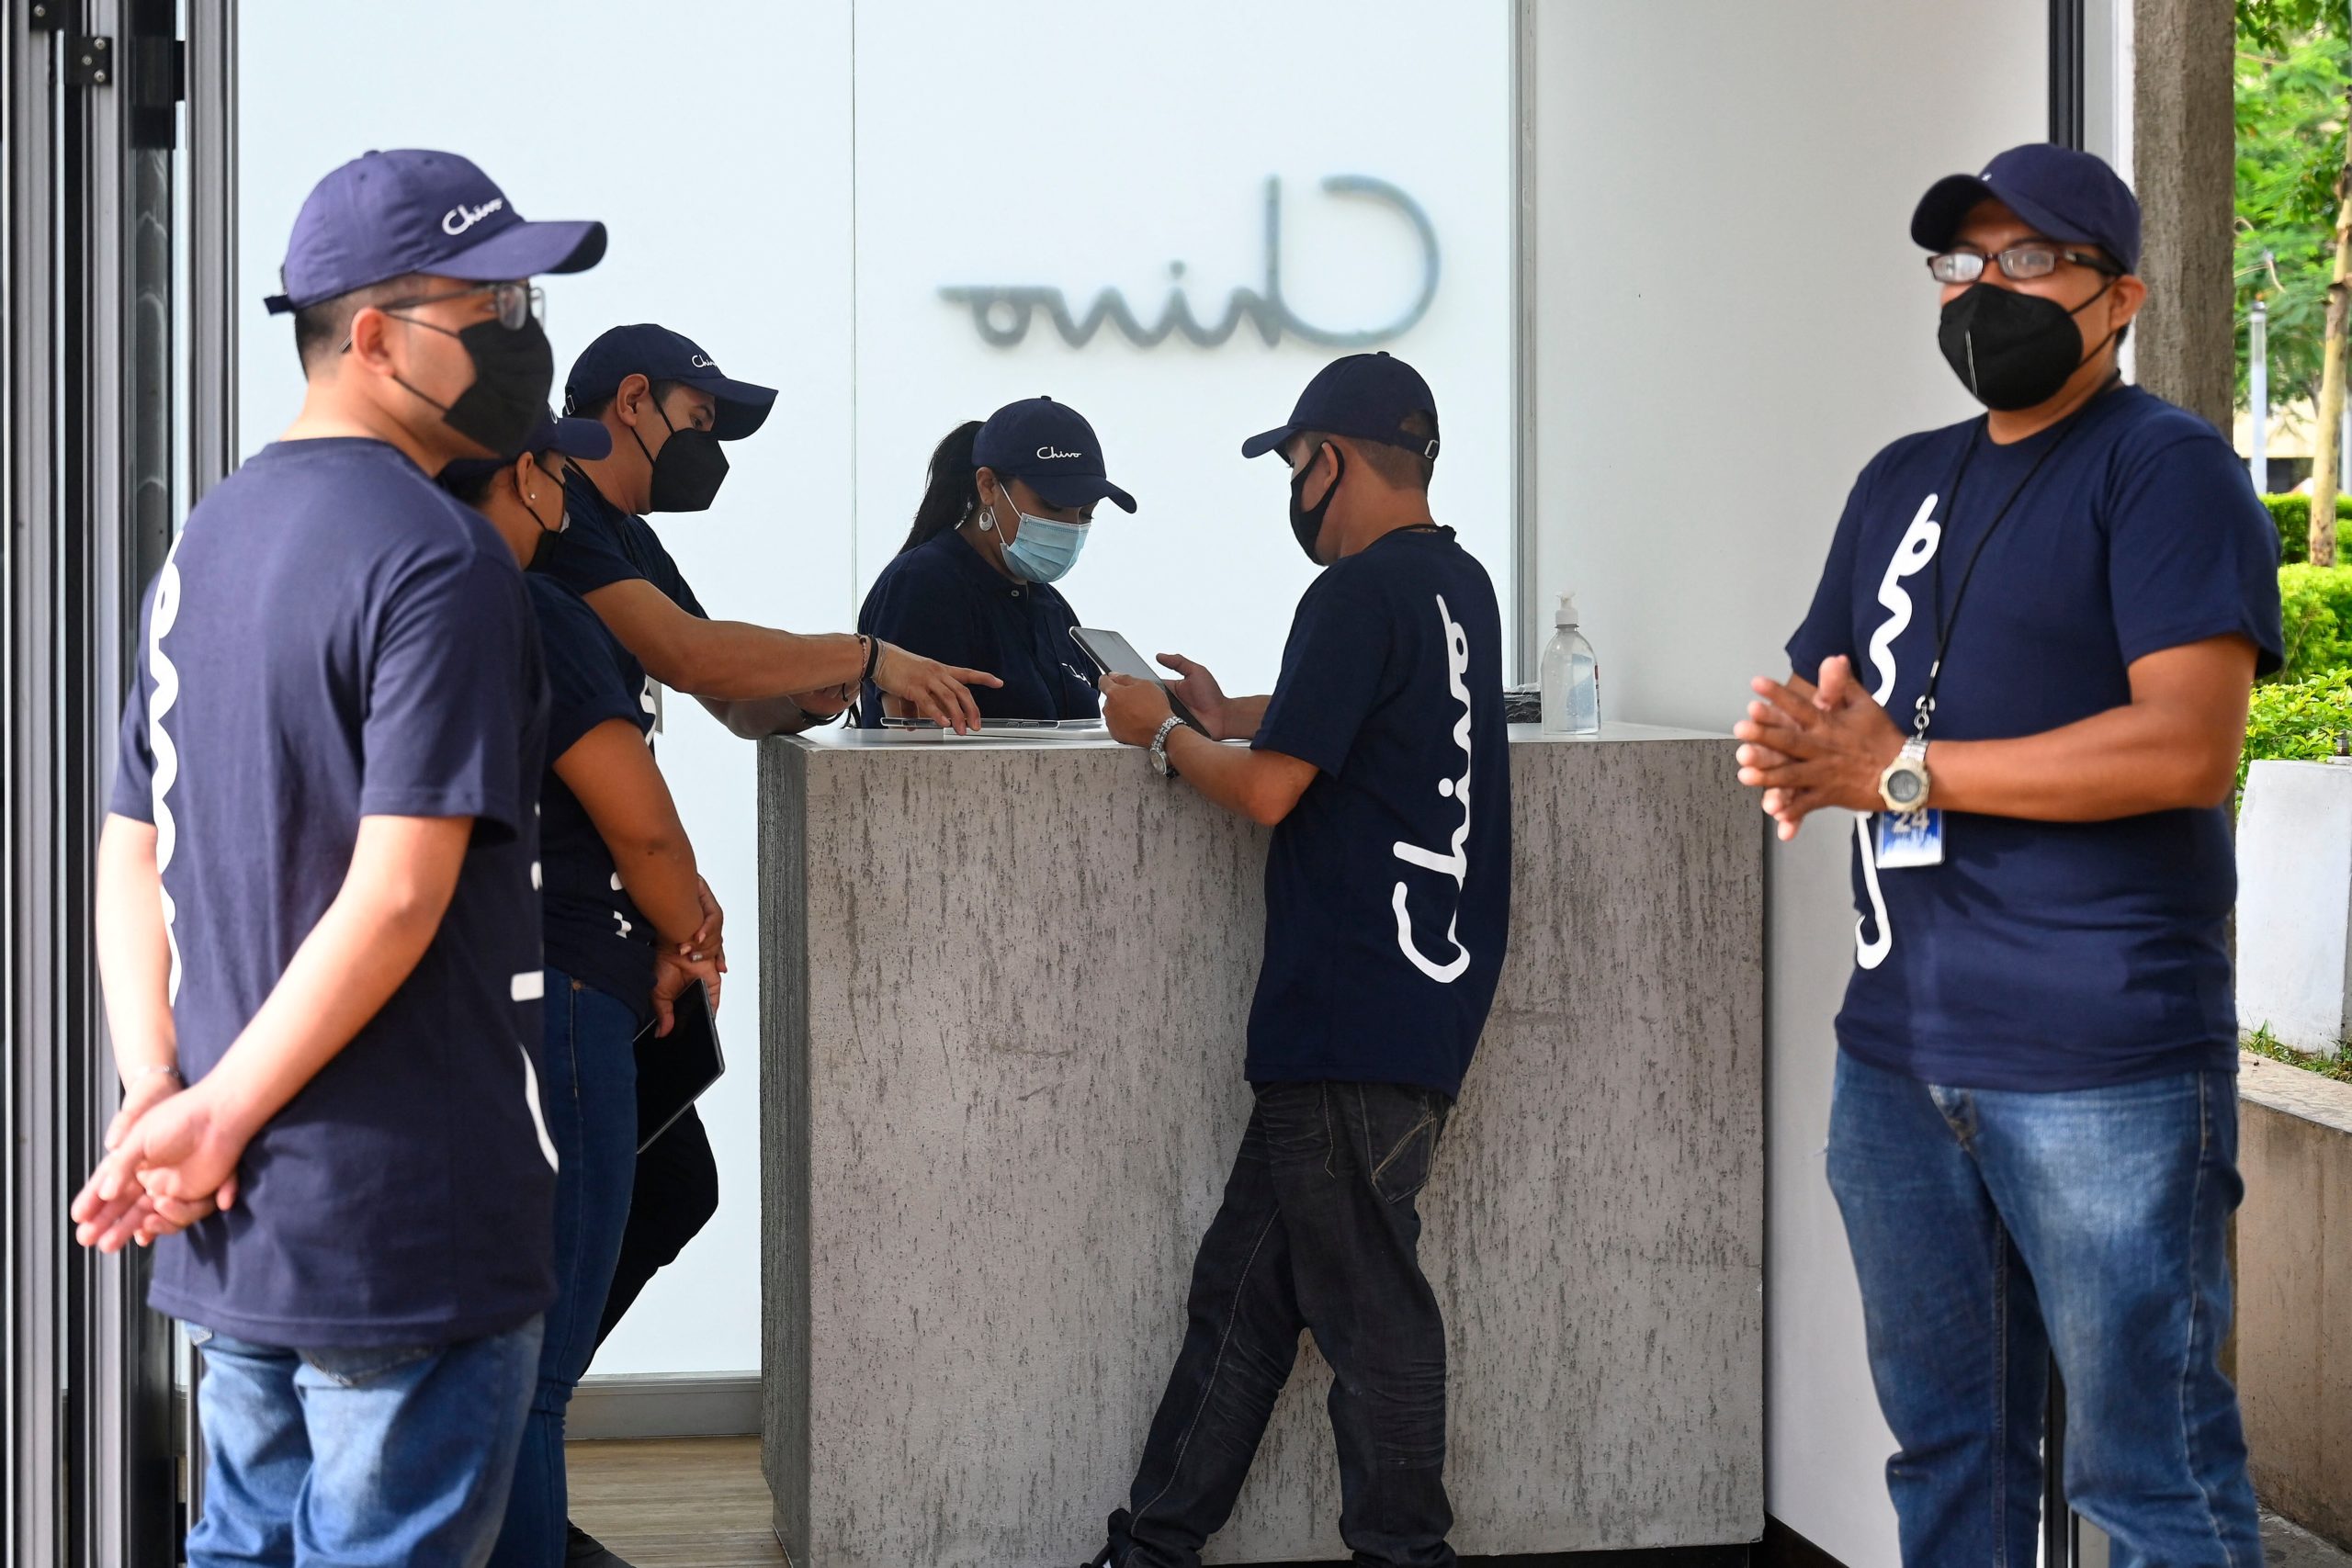 Government employees prepare to receive people who want to use the bitcoin ATM during an outage of the Chivo Wallet system in San Salvador, on September 7, 2021.  (Photo: Marvin Recinos/AFP, Getty Images)